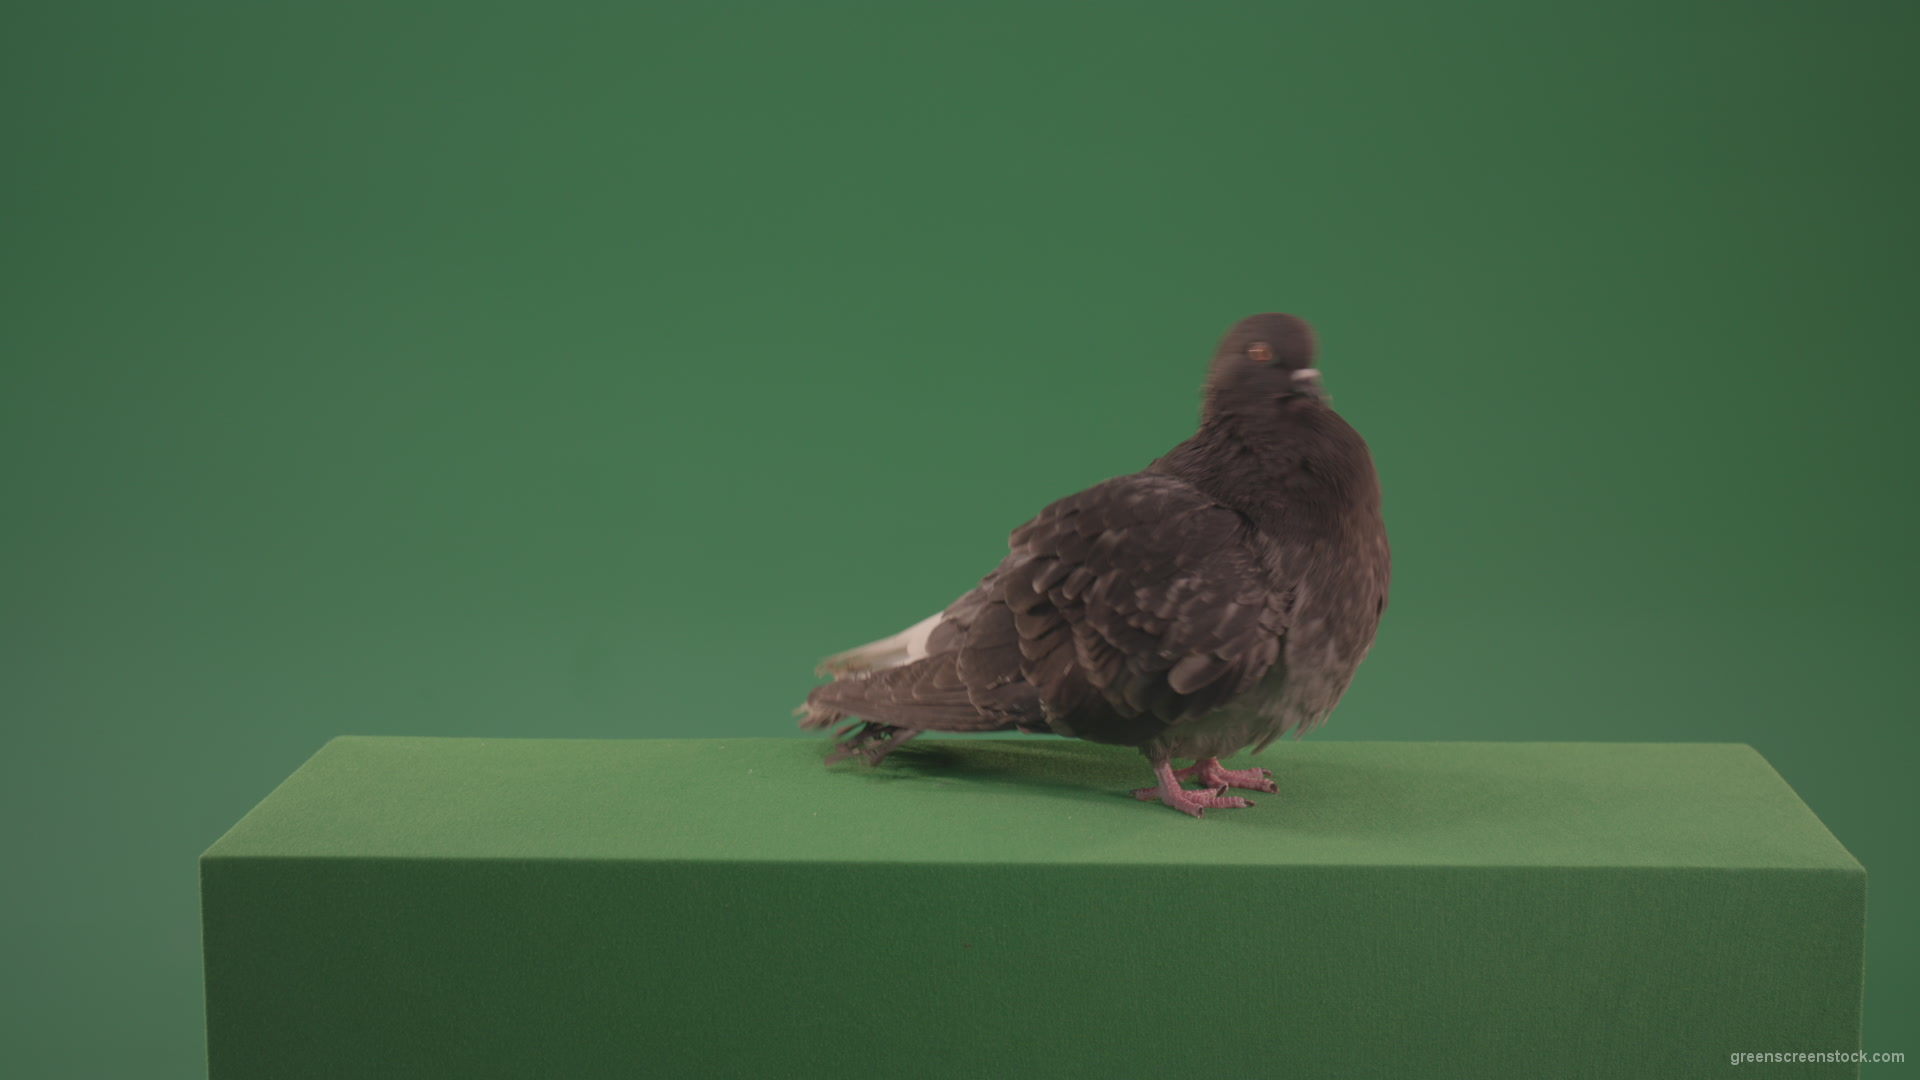 Bird-landed-and-inspected-the-territory-isolated-on-chromakey-background_005 Green Screen Stock